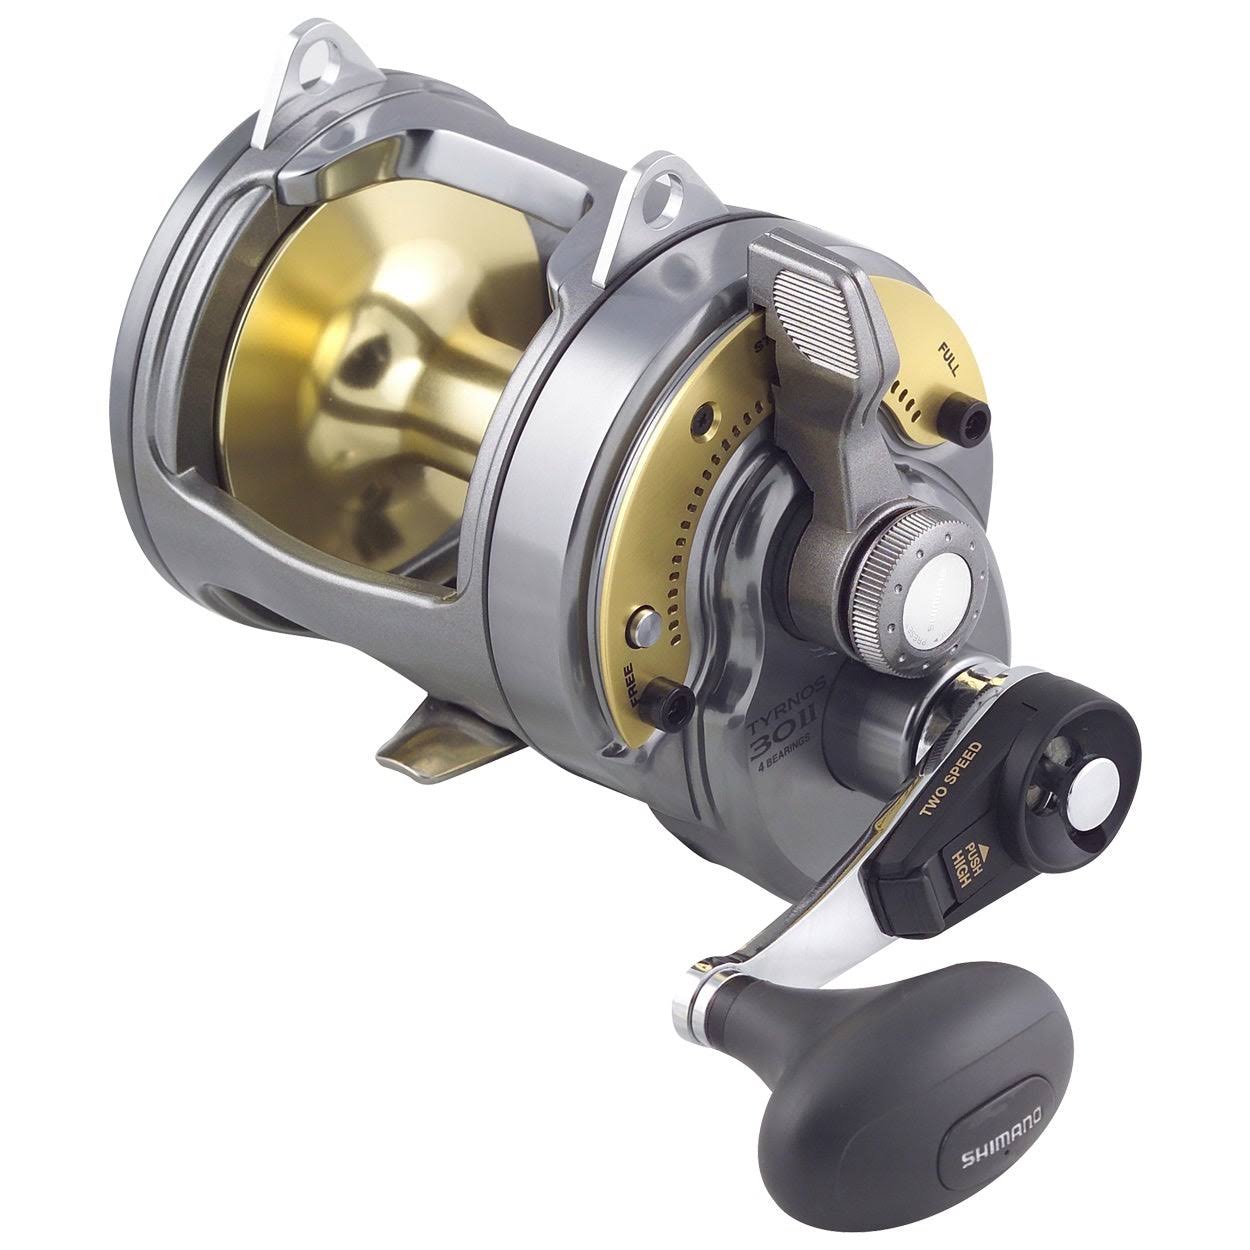 Shimano Tyrnos 30 II TYR30II Conventional Reel - Silver/Gold, 2 Speed